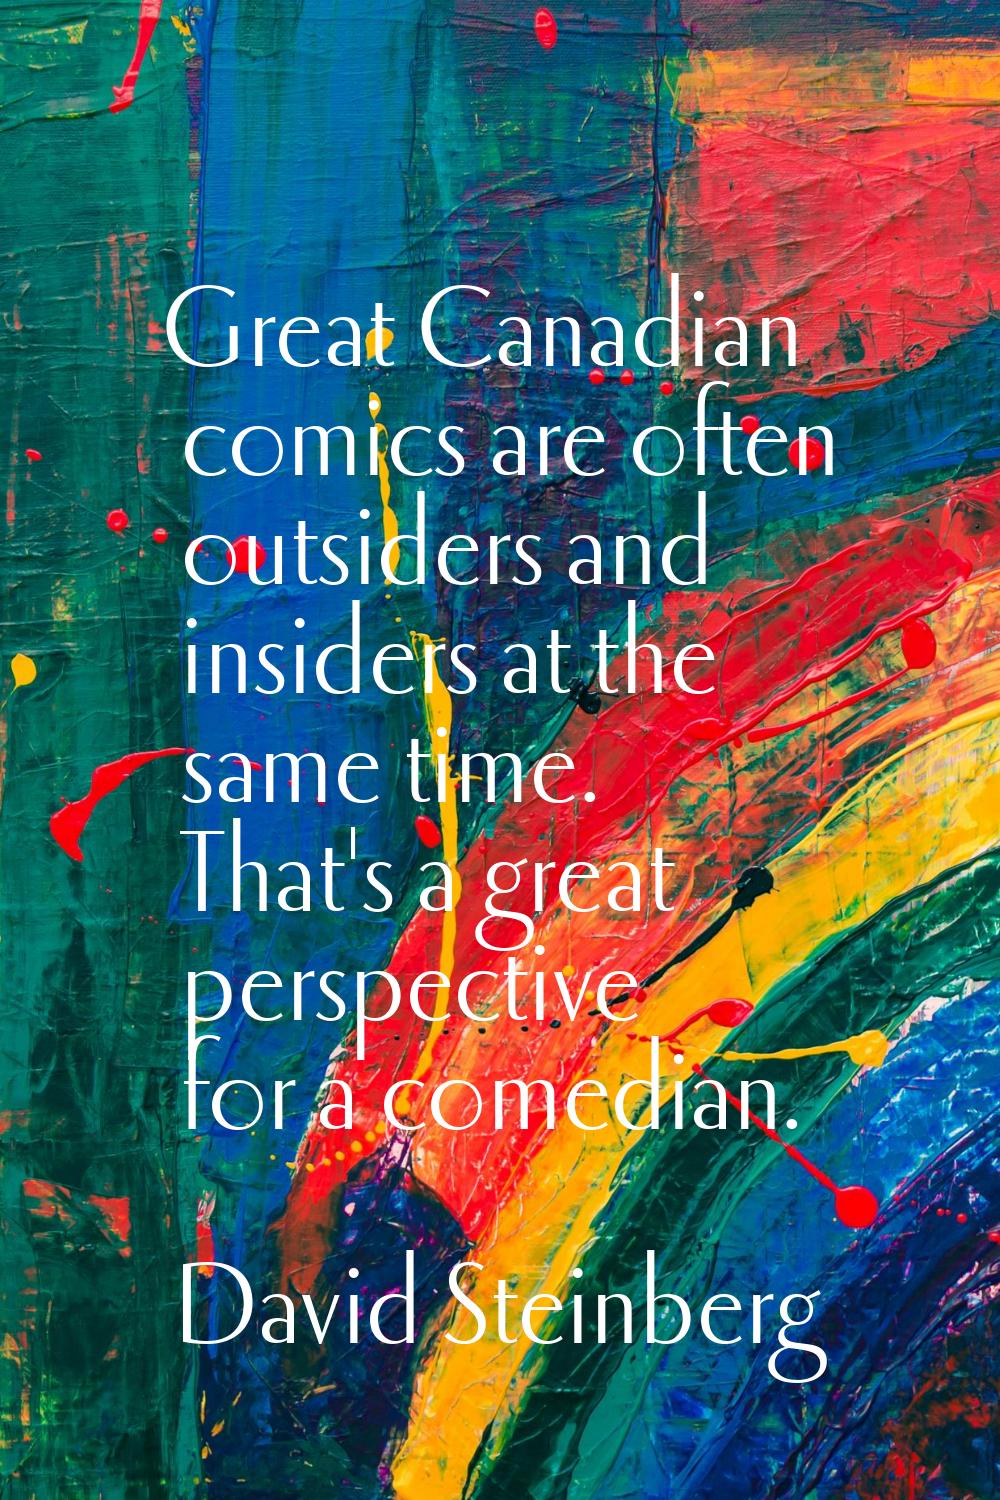 Great Canadian comics are often outsiders and insiders at the same time. That's a great perspective